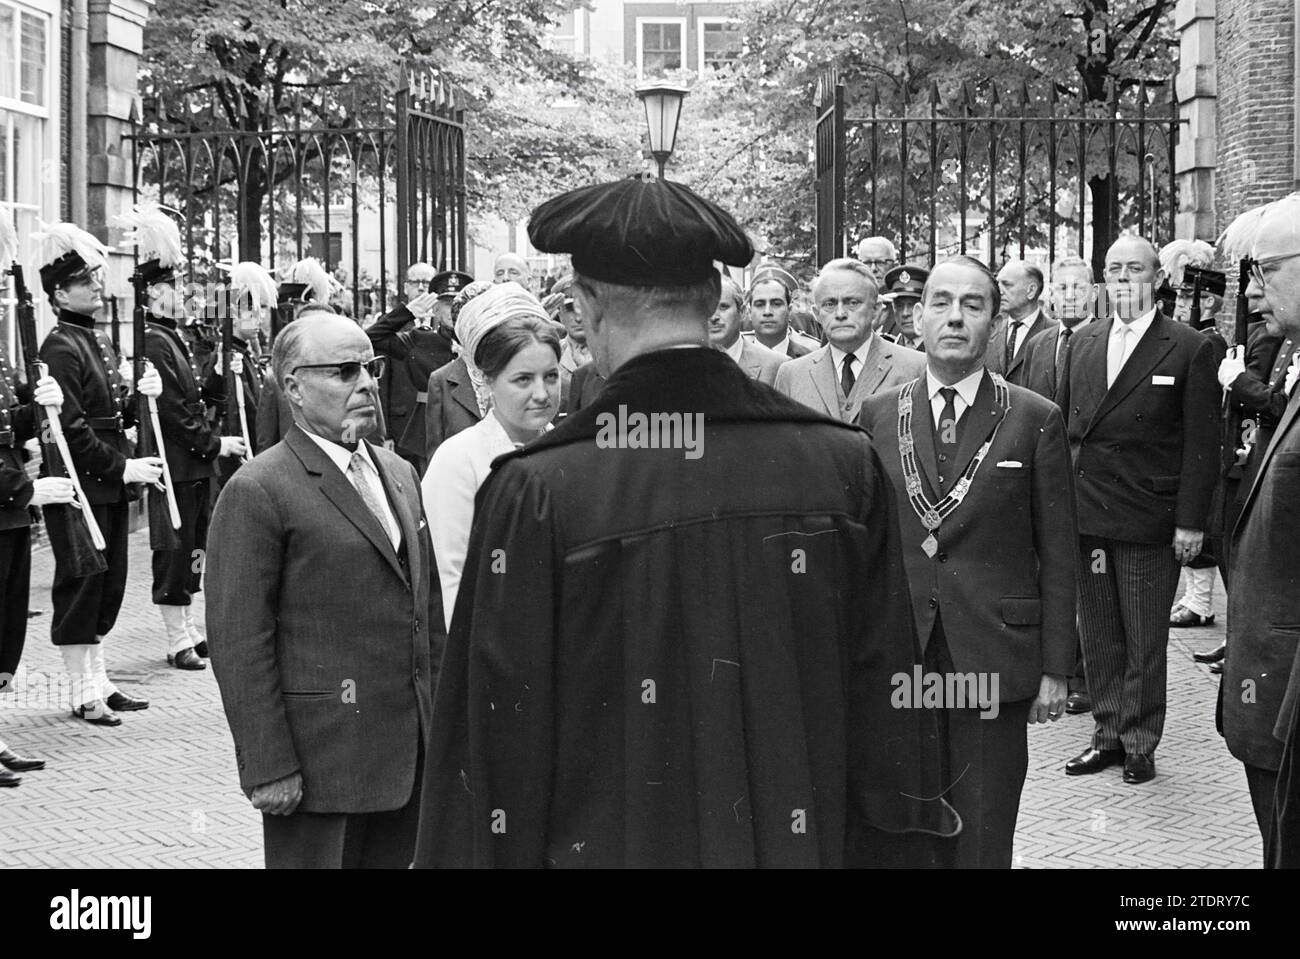 President Bourgiba in our country, Royal receptions and Royal visits, 06-07-1966, Whizgle News from the Past, Tailored for the Future. Explore historical narratives, Dutch The Netherlands agency image with a modern perspective, bridging the gap between yesterday's events and tomorrow's insights. A timeless journey shaping the stories that shape our future Stock Photo